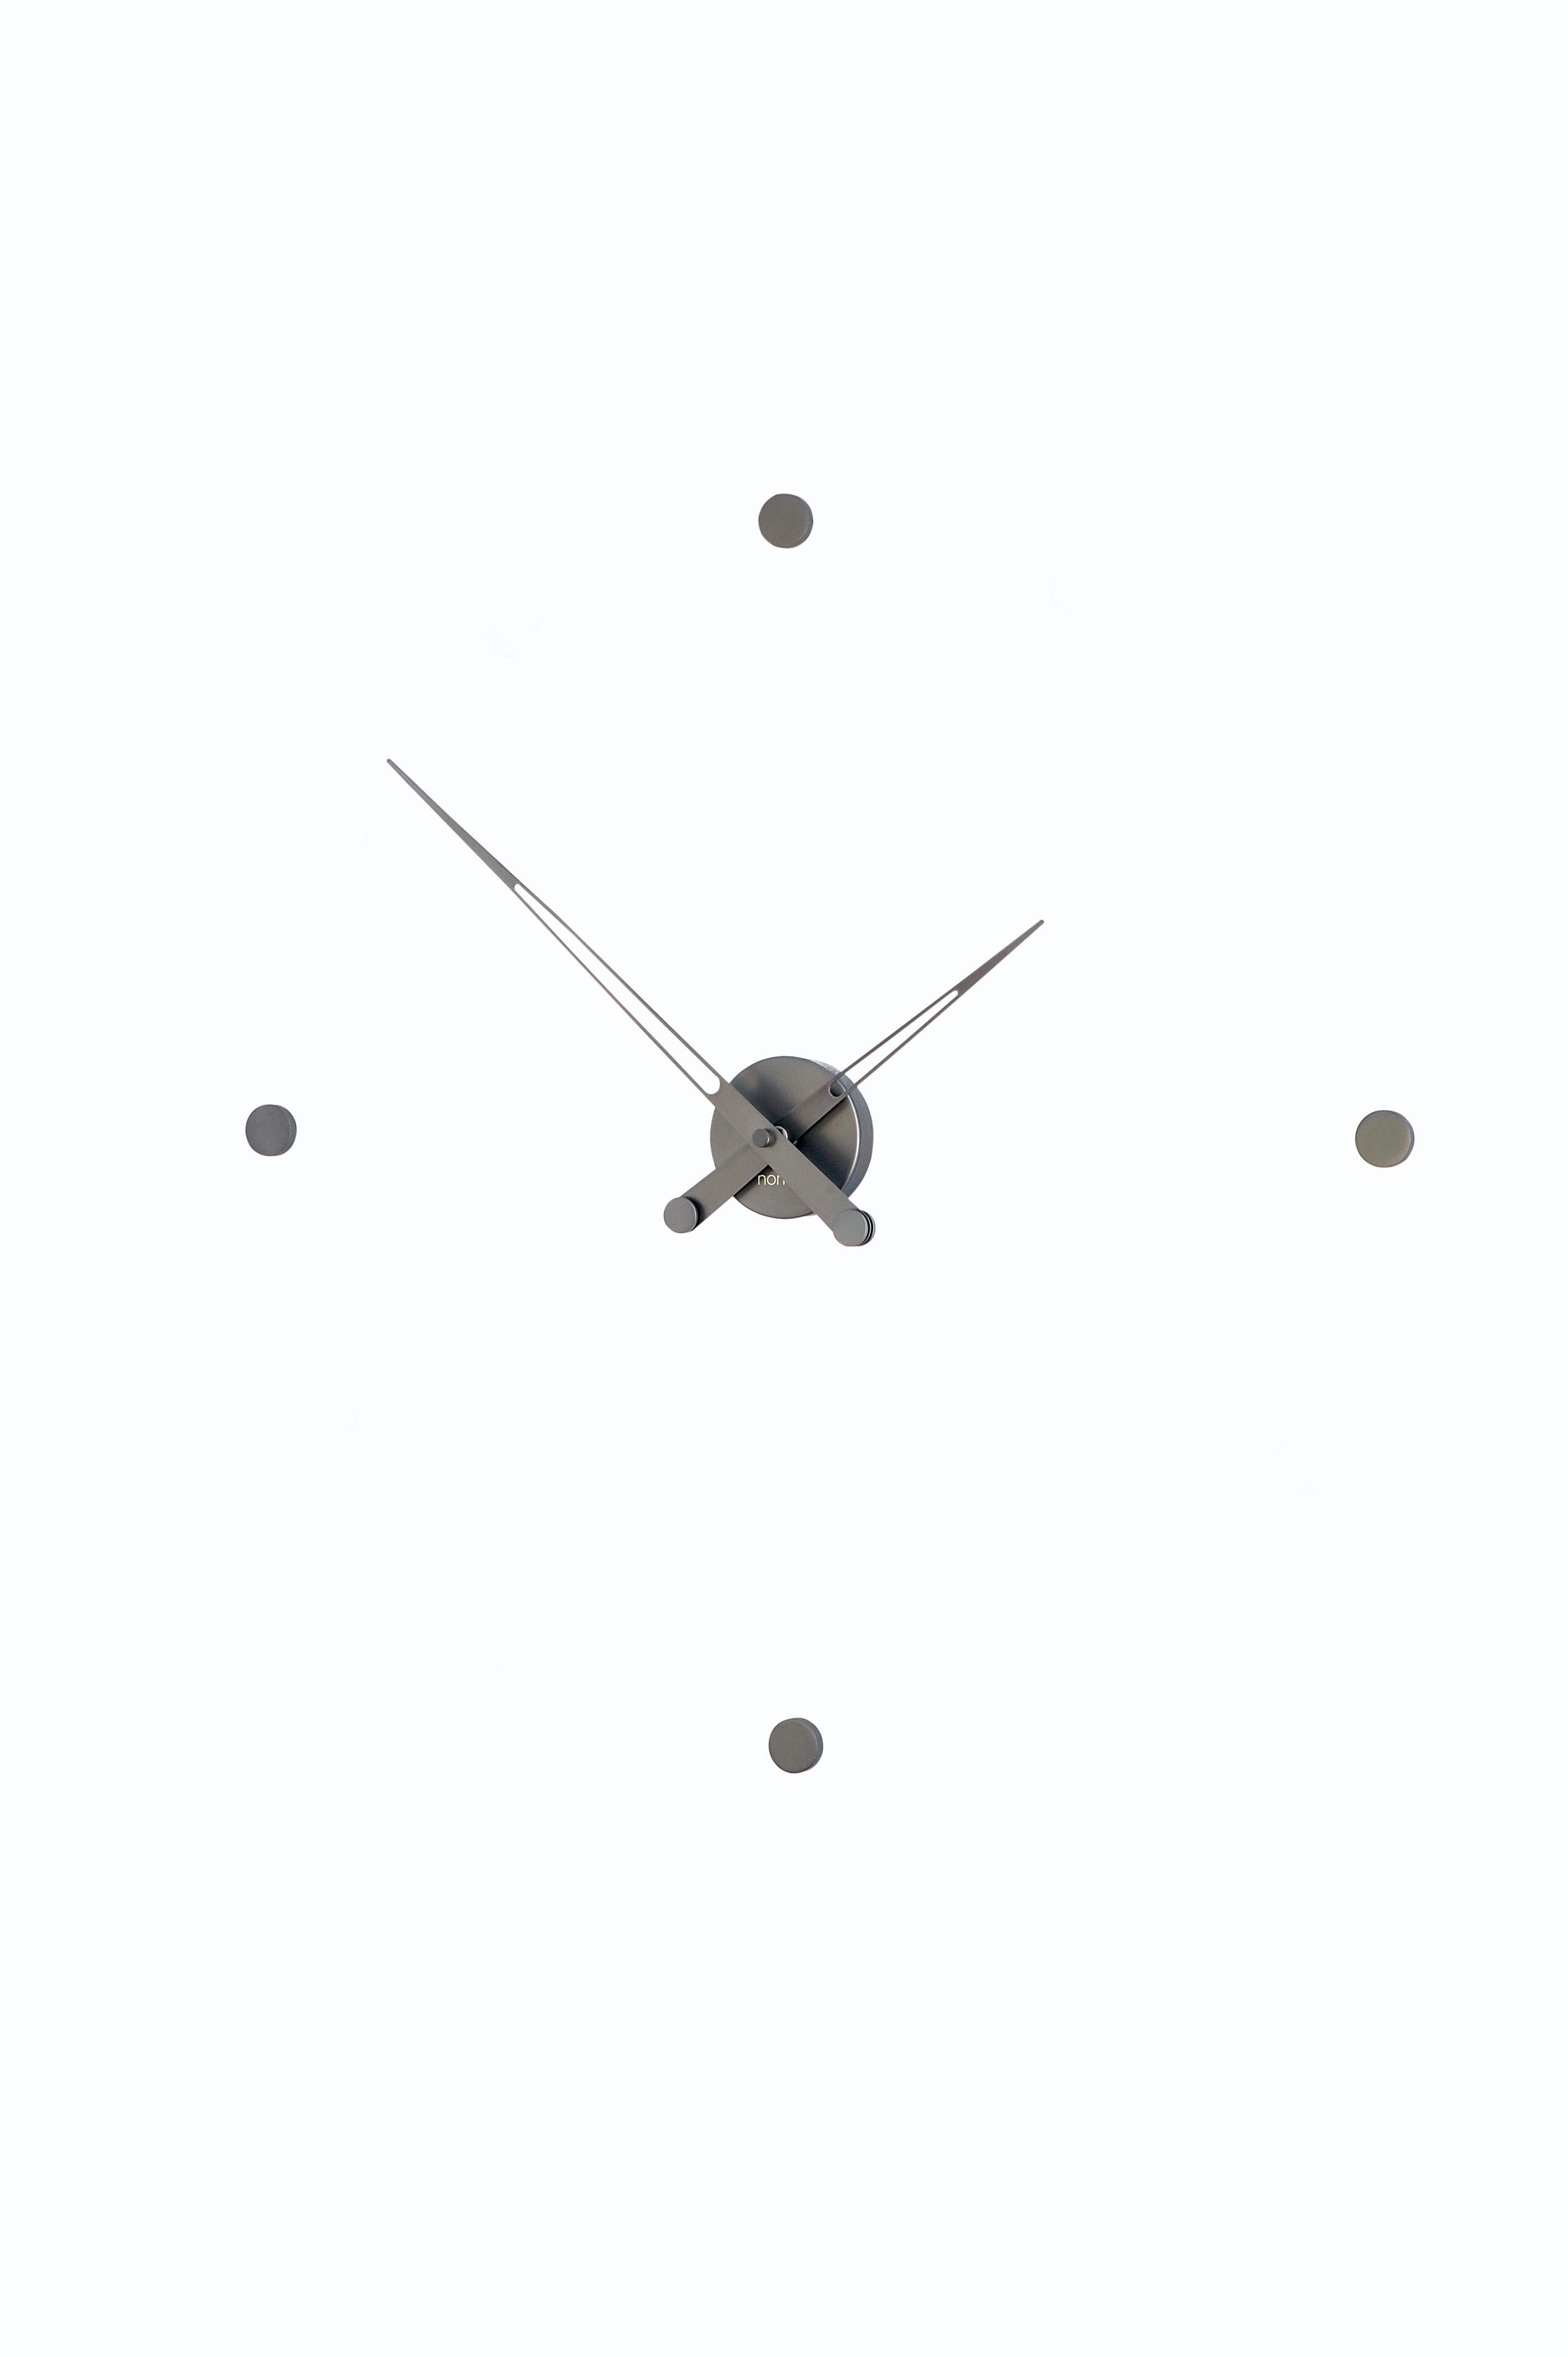 Nomon Rodon Wall Clock By Jose Maria Reina In New Condition For Sale In Brooklyn, NY